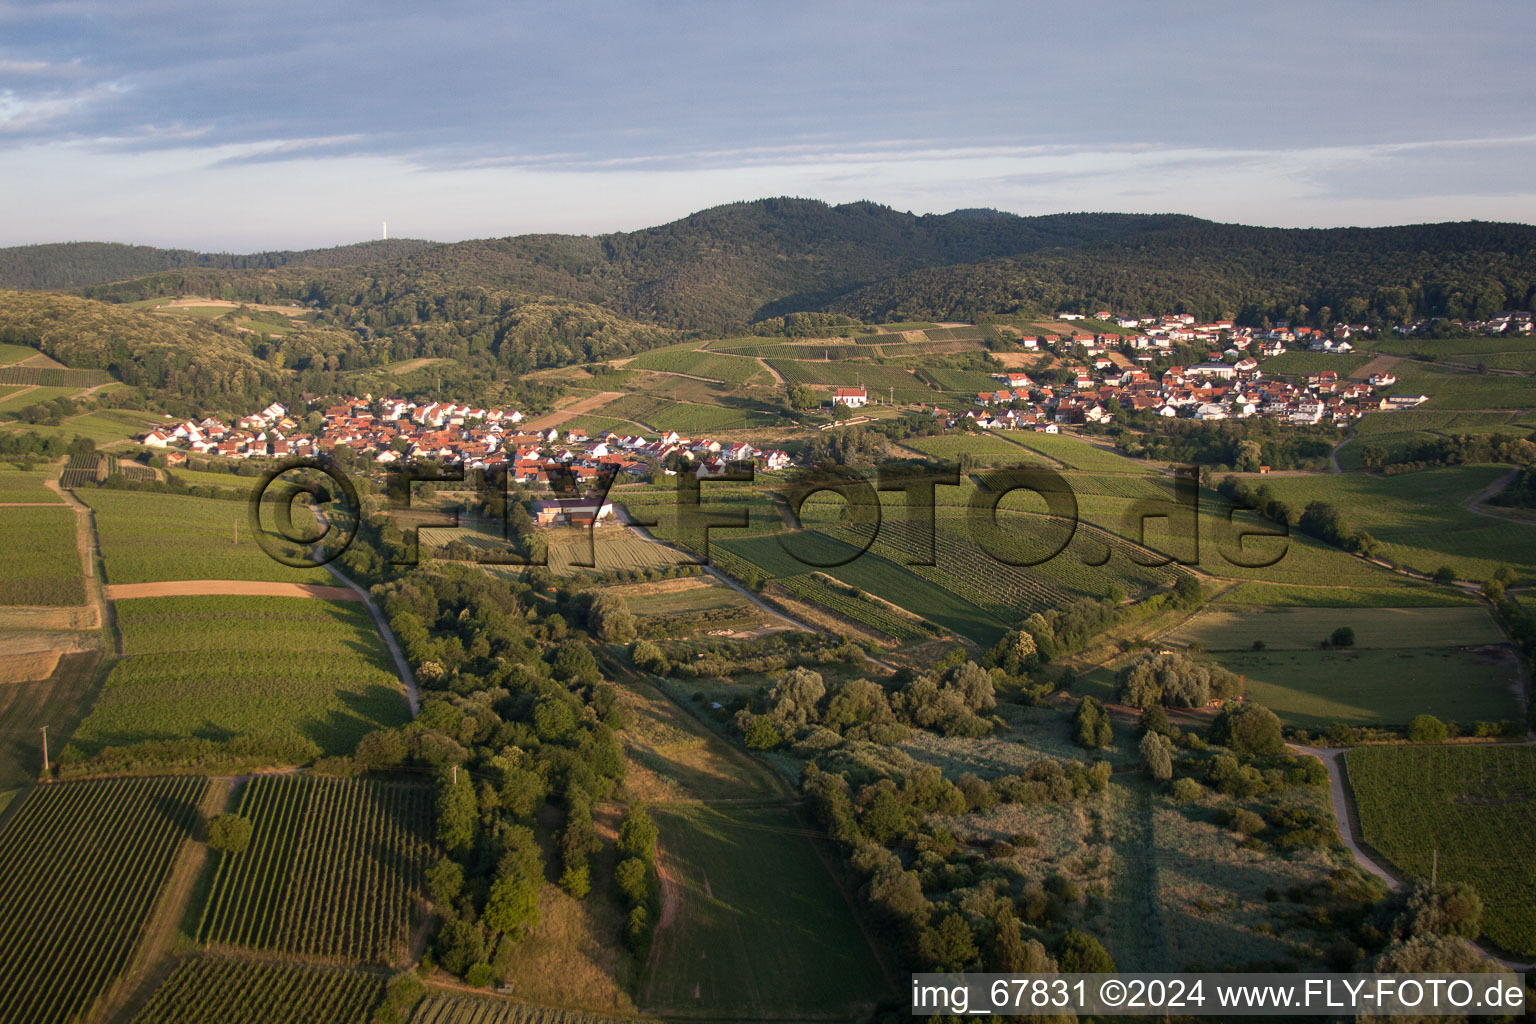 Local area and surroundings on the Haardtrand in the district Gleishorbach in Gleiszellen-Gleishorbach in the state Rhineland-Palatinate, Germany